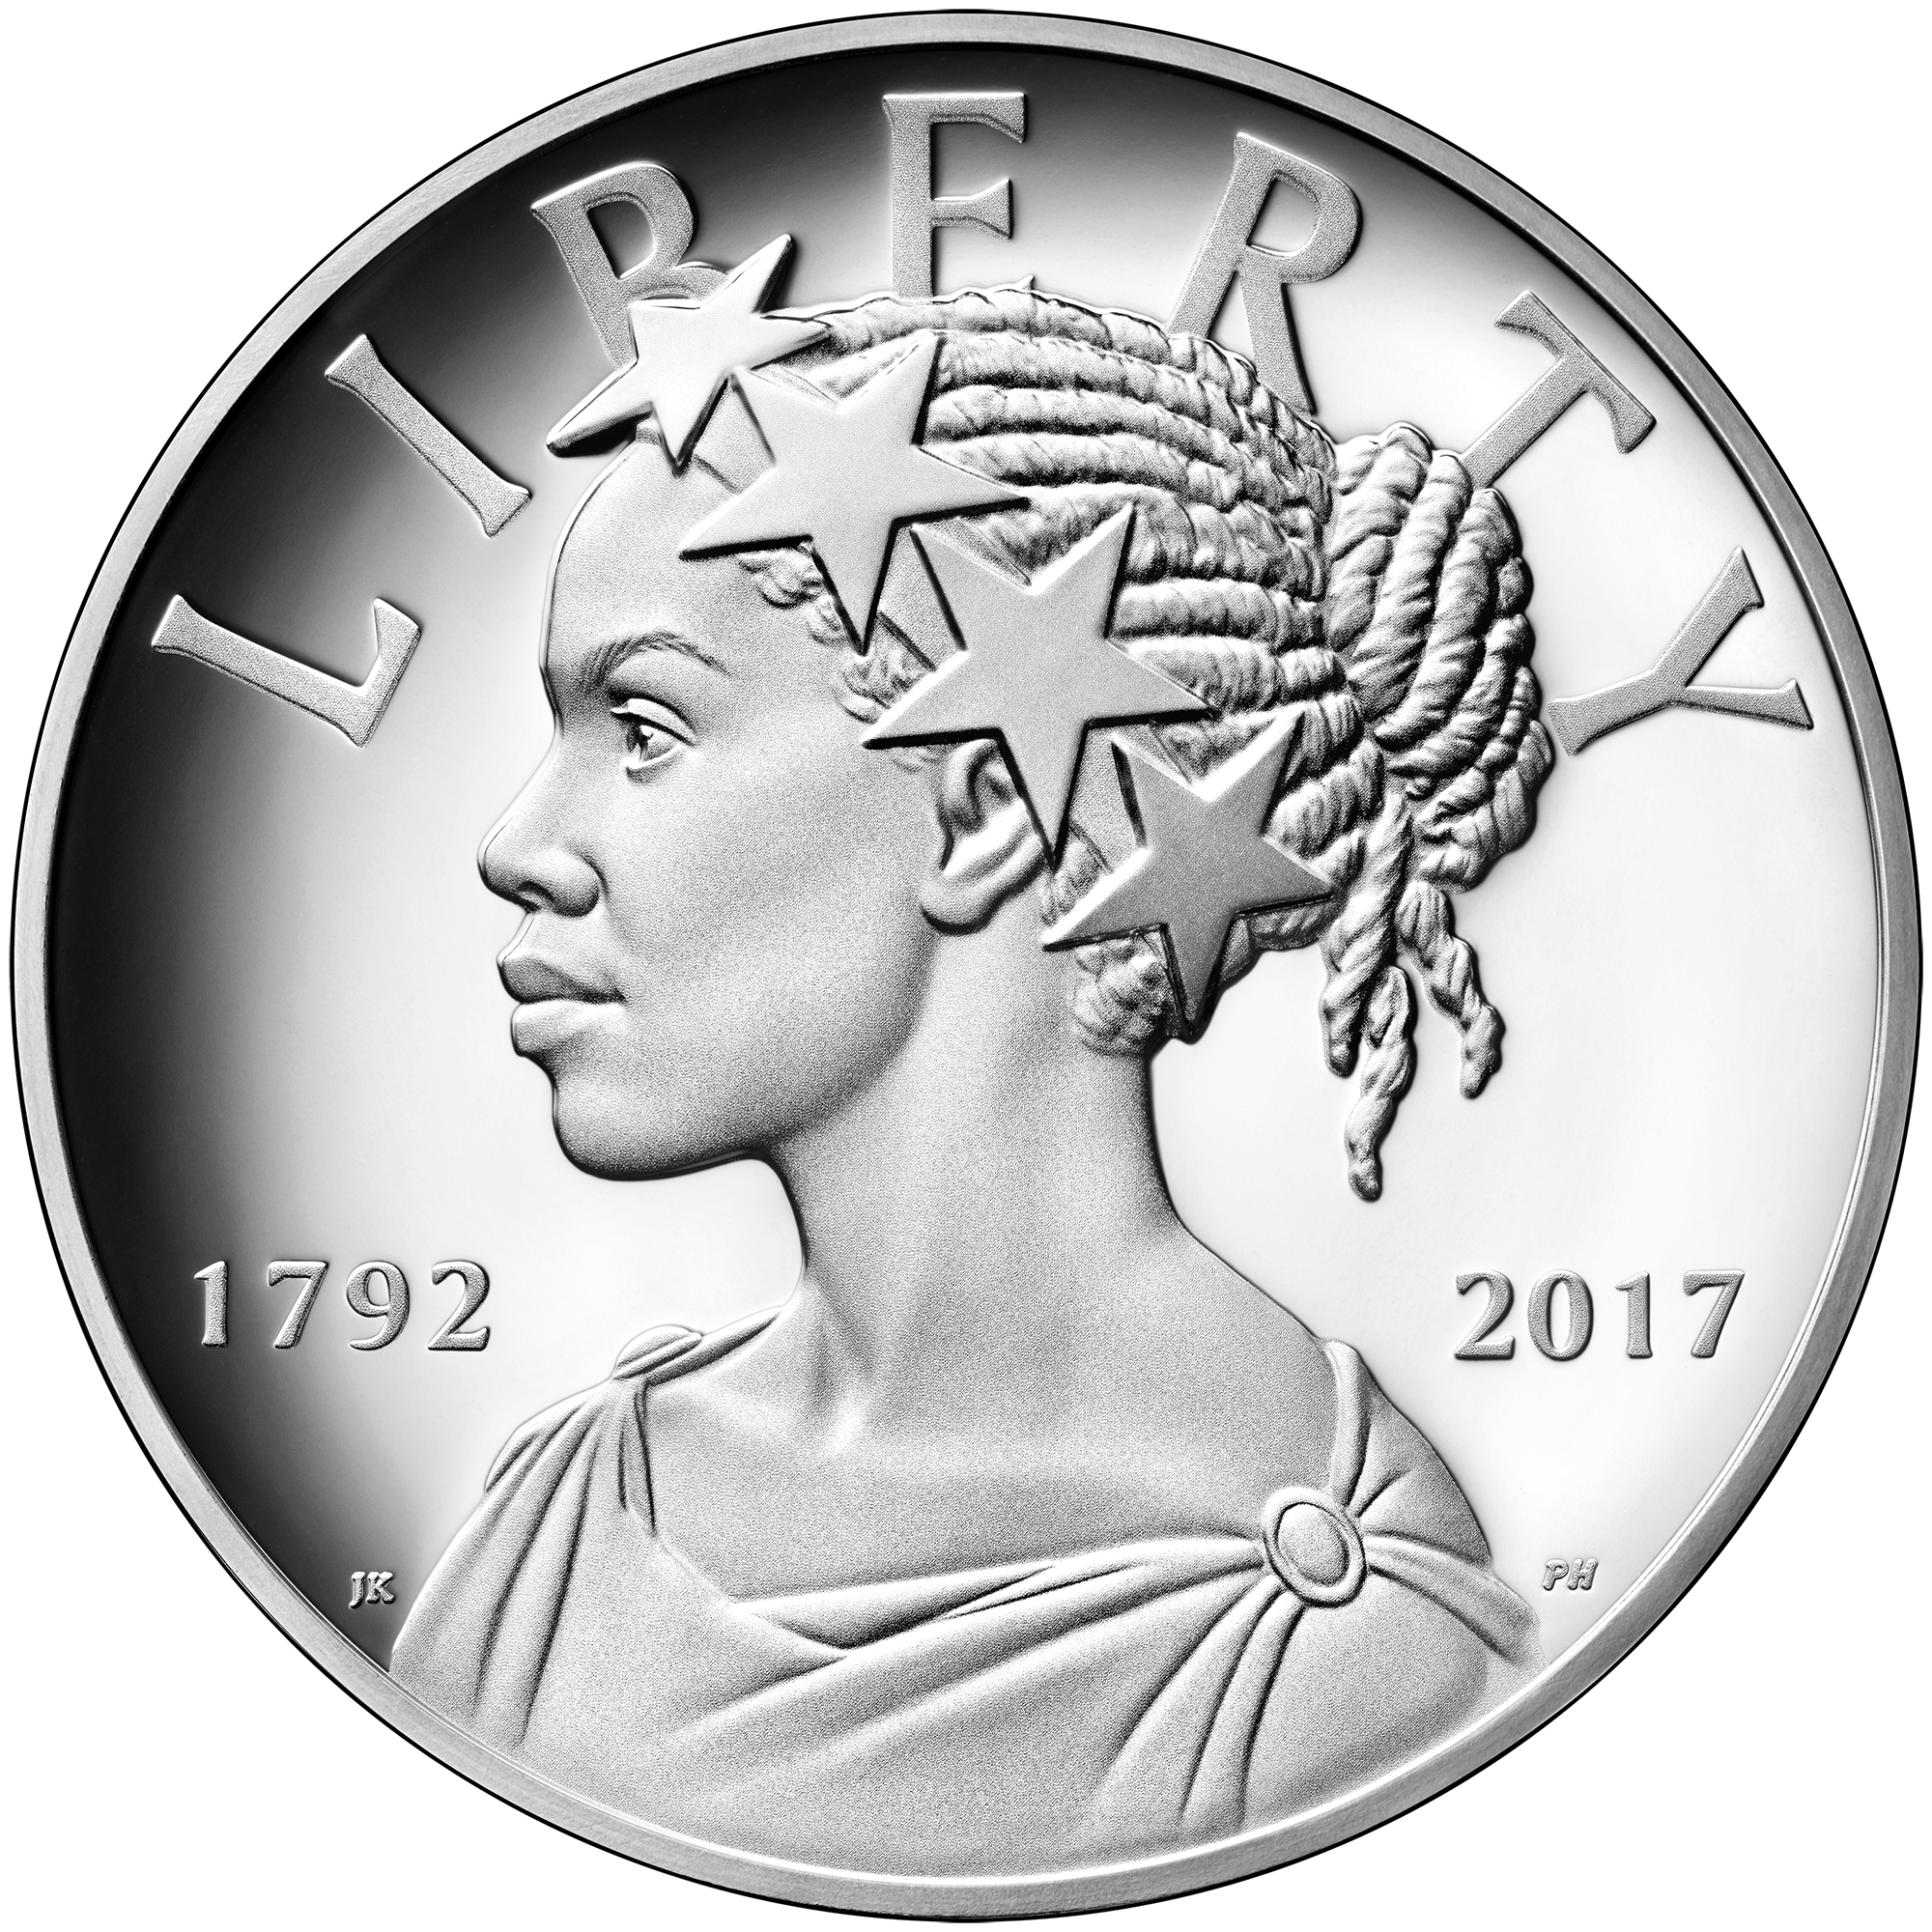 2017 American Liberty 225th Anniversary Silver Medal Obverse